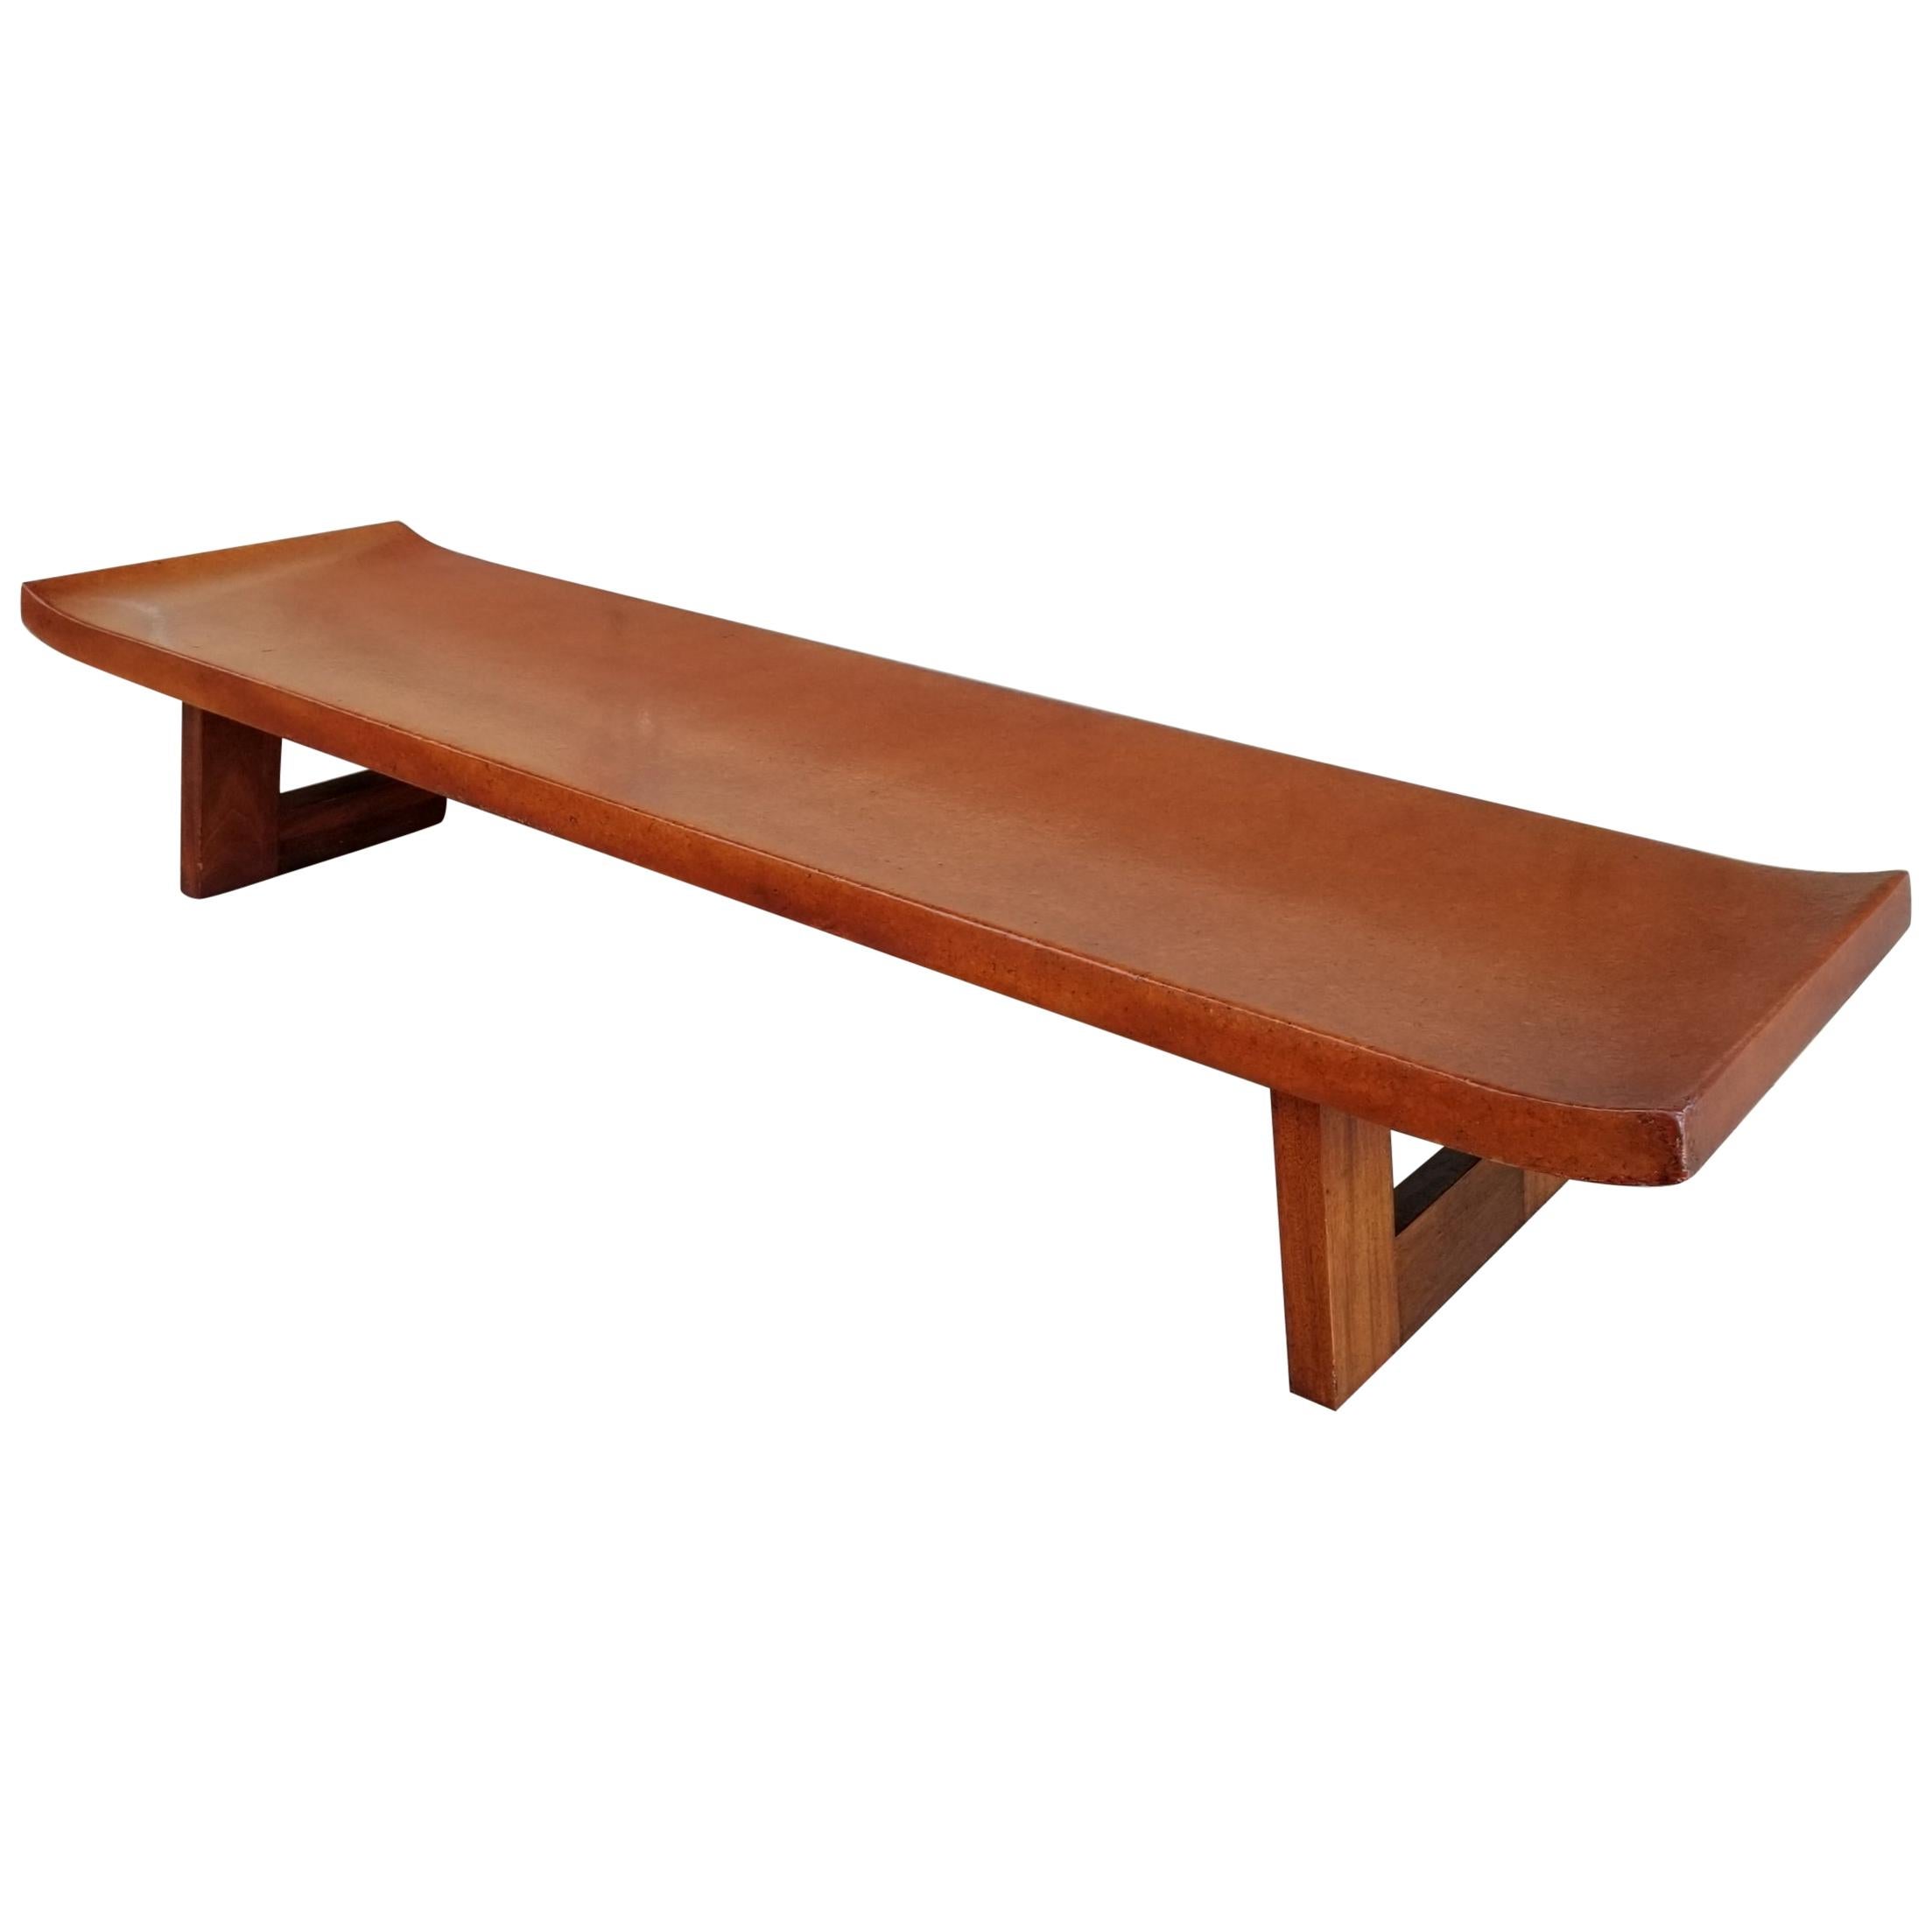 Paul Frankl Cork Top Coffee Table / Bench